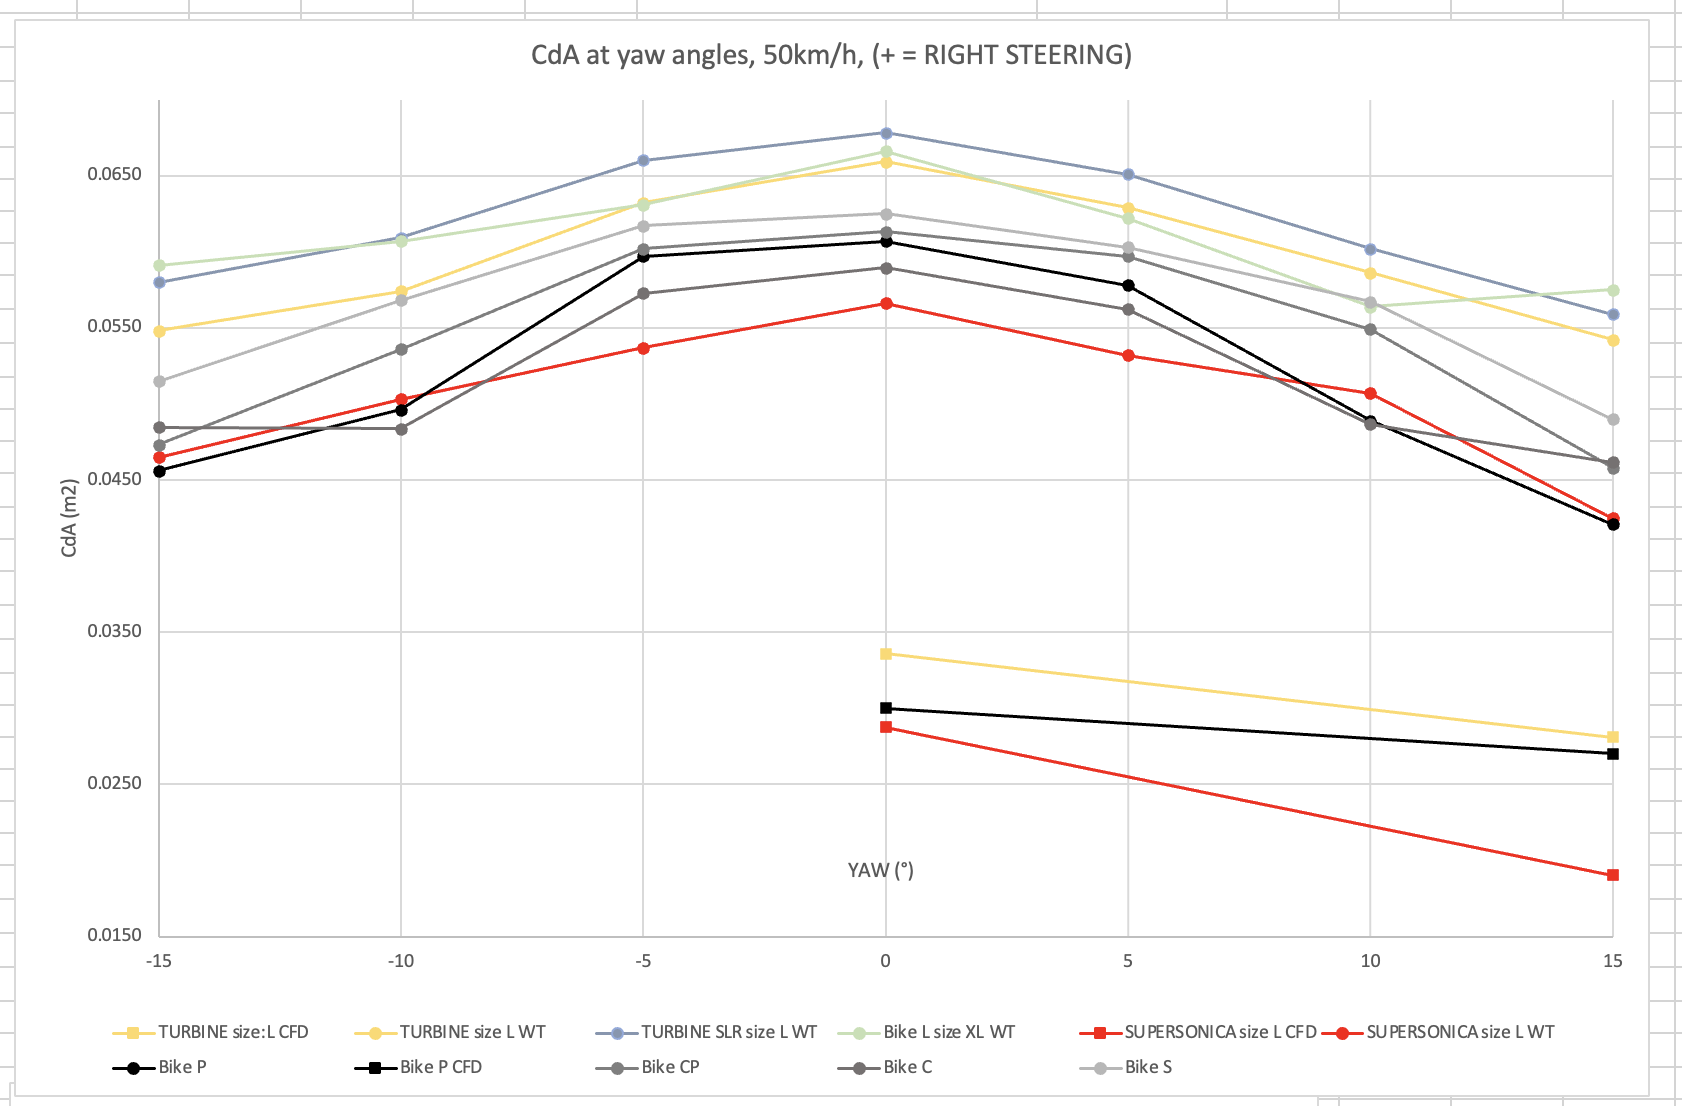 The image shows wind tunnel and CFD analysis results of the new Supersonica versus "leading competitor frames."